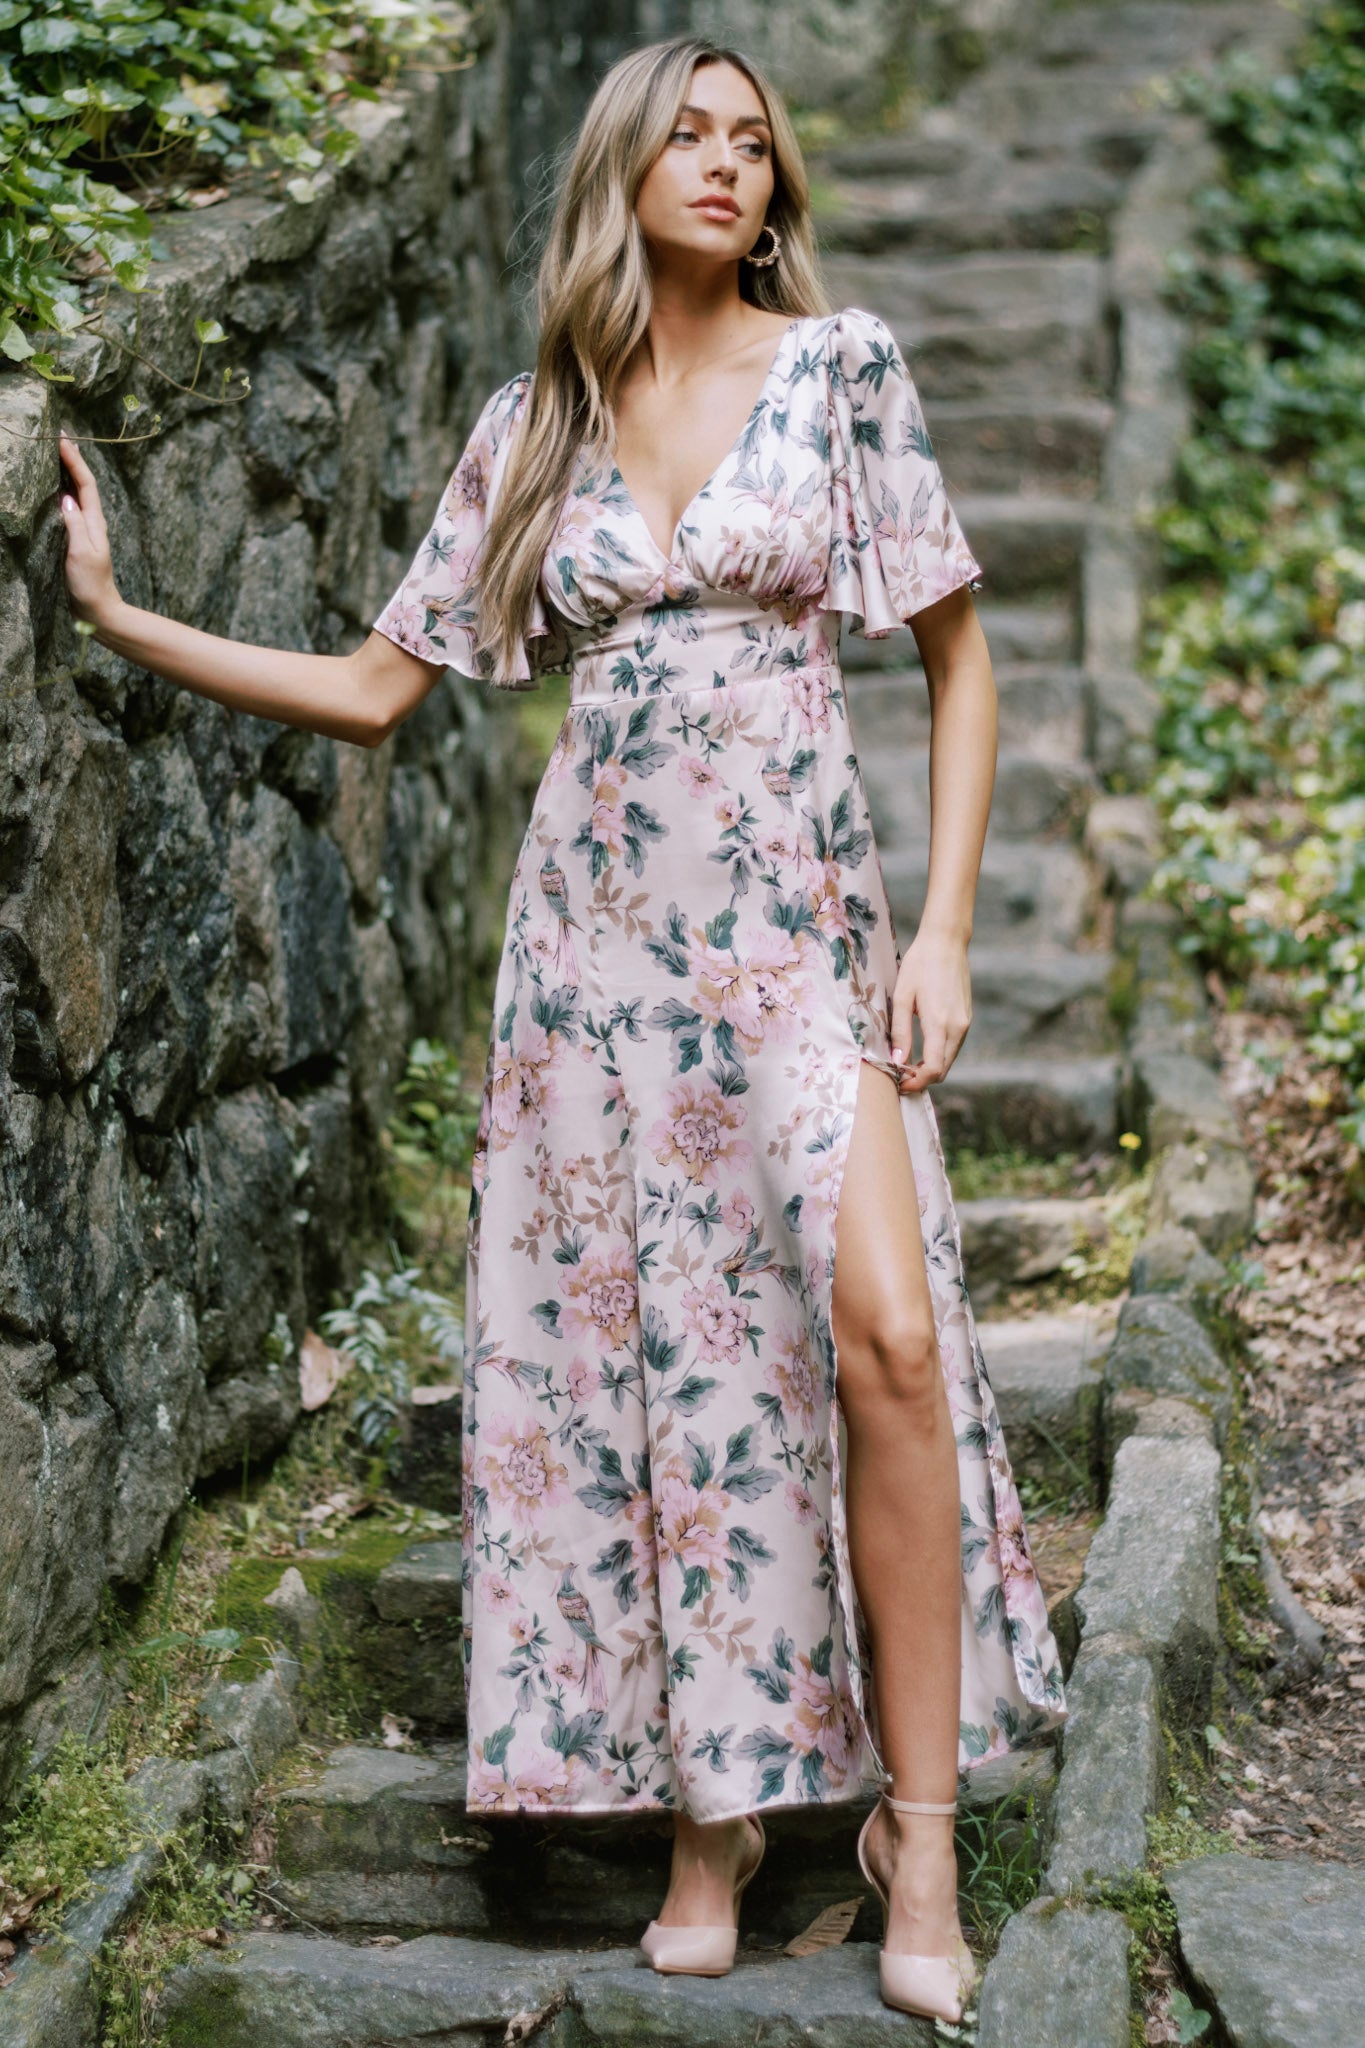 This maxi dress features a deep V-neckline, flutter sleeves, a fitted waist, A-line skirt, and a floral print with a subtle front slit.